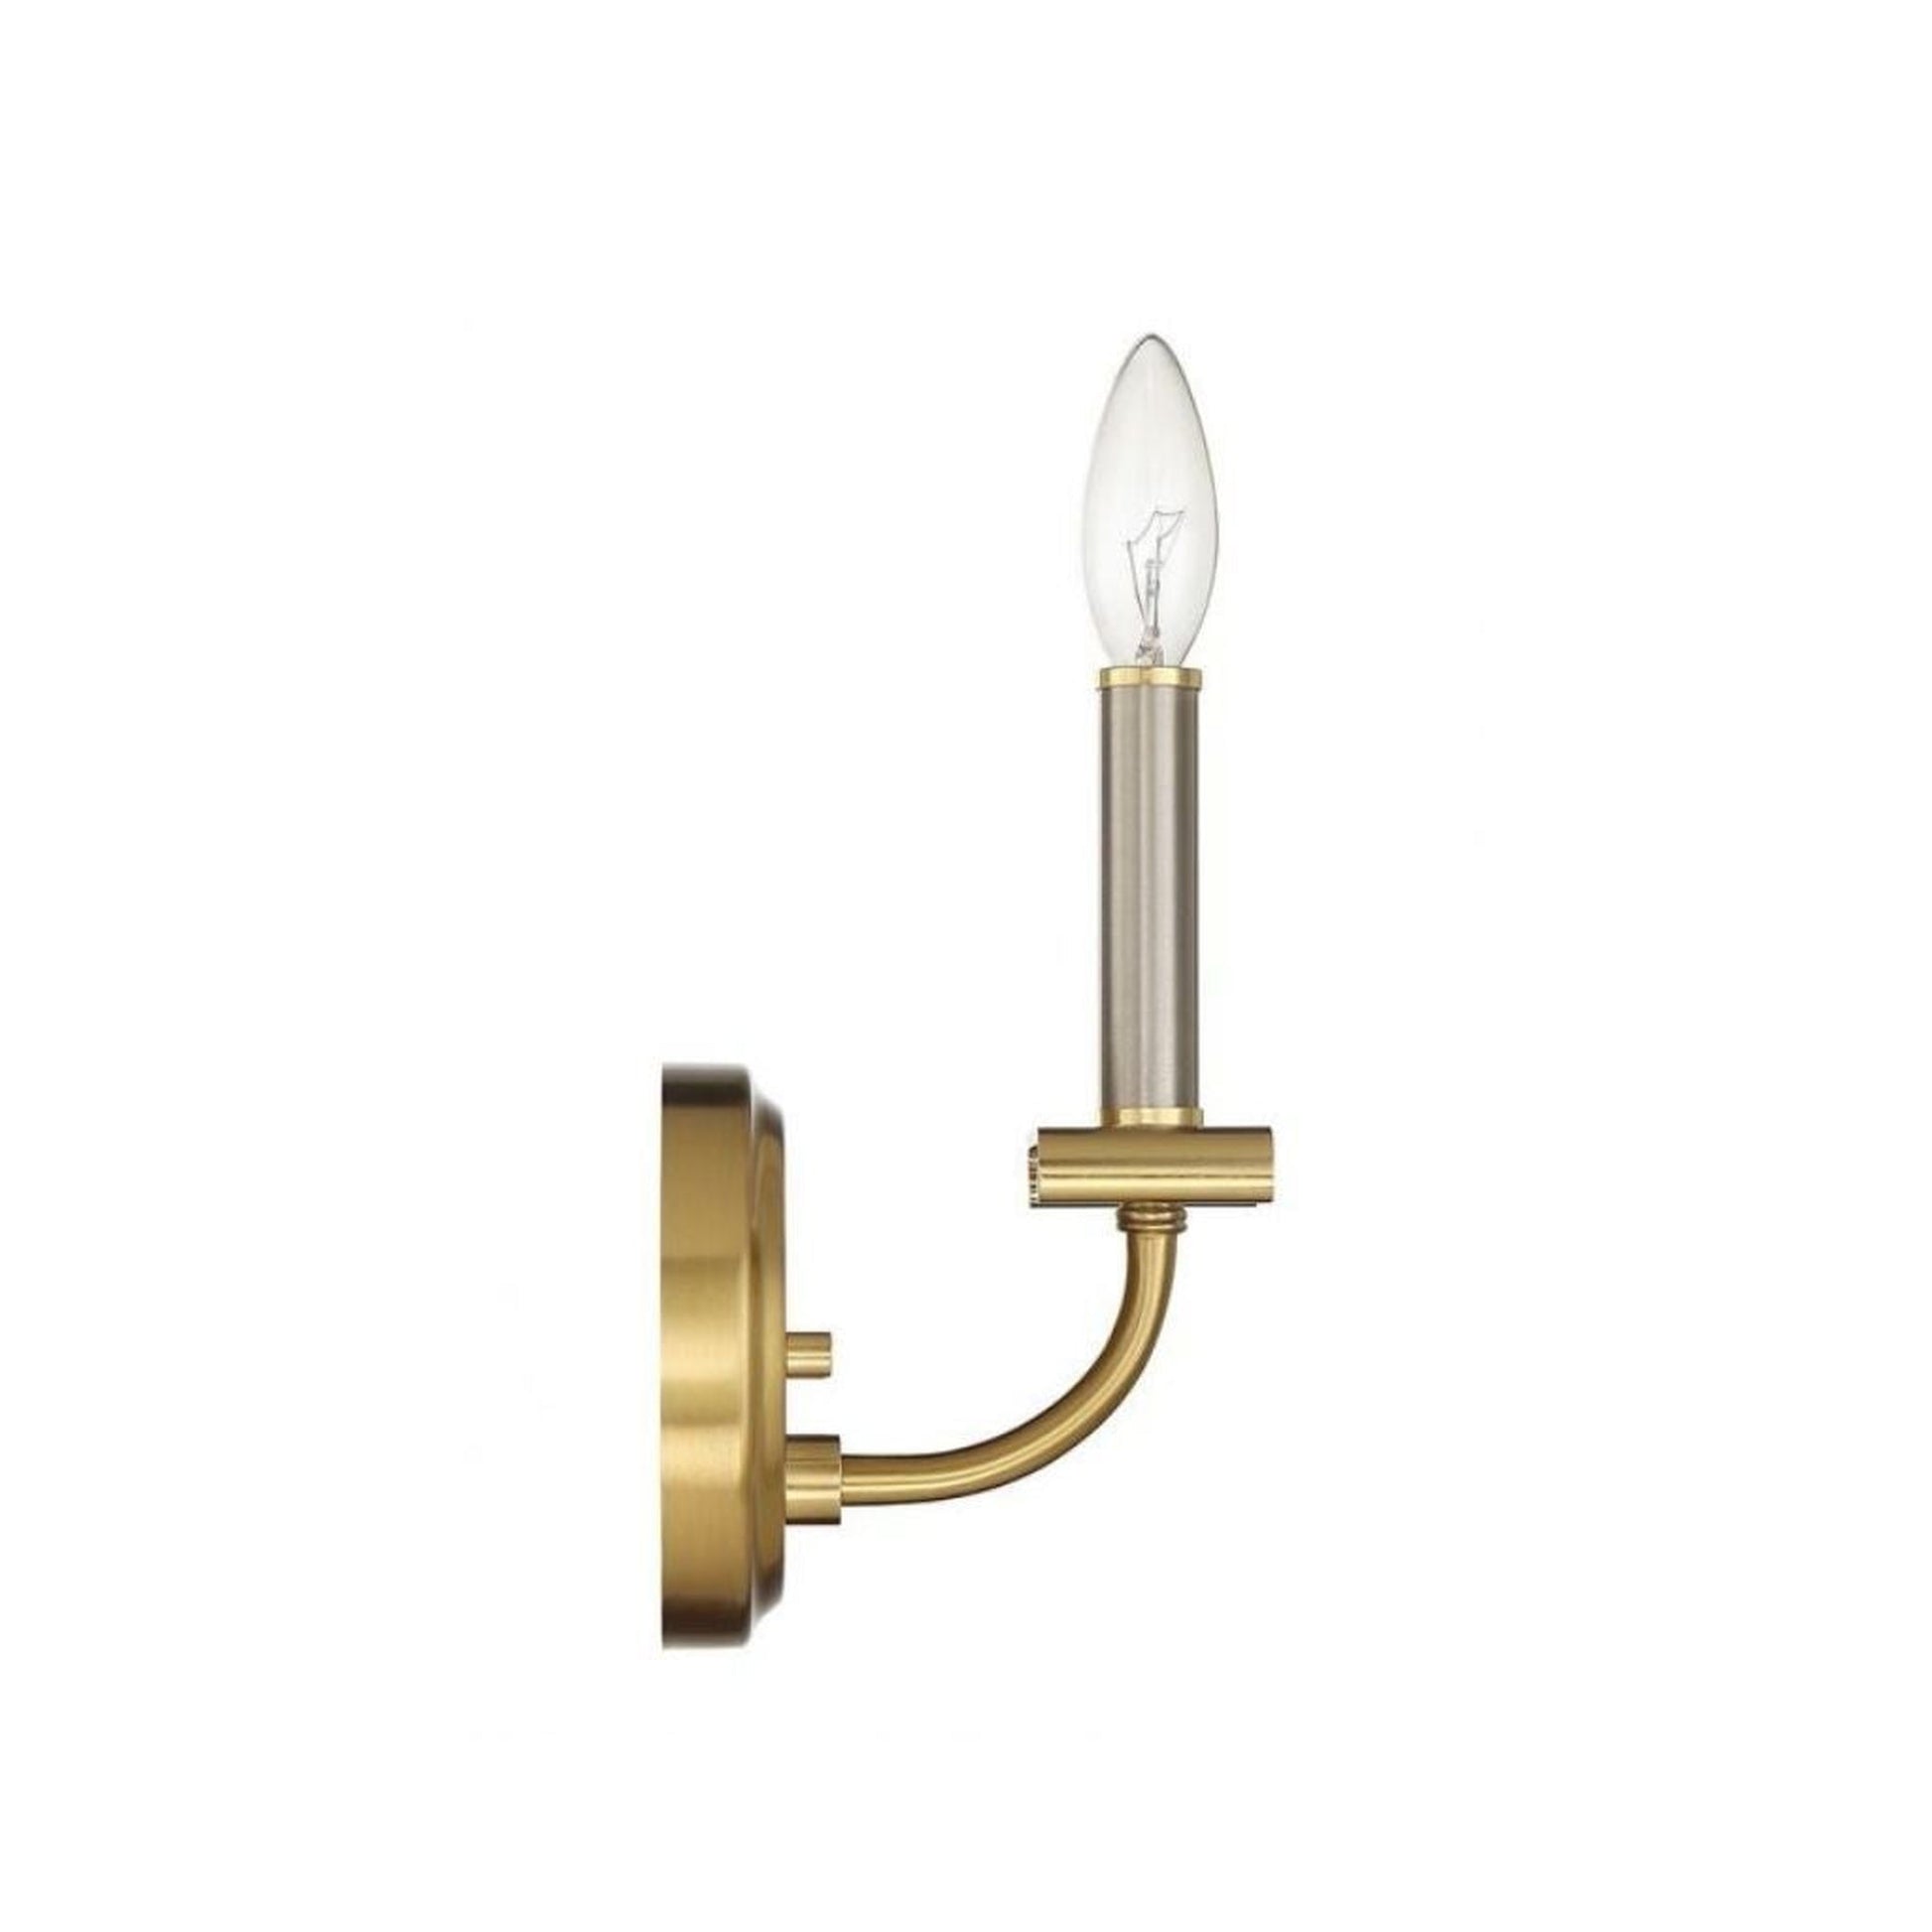 Craftmade Stanza 5" x 8" 1-Light Brushed Polished Nickel and Satin Brass Candle-style Wall Sconce